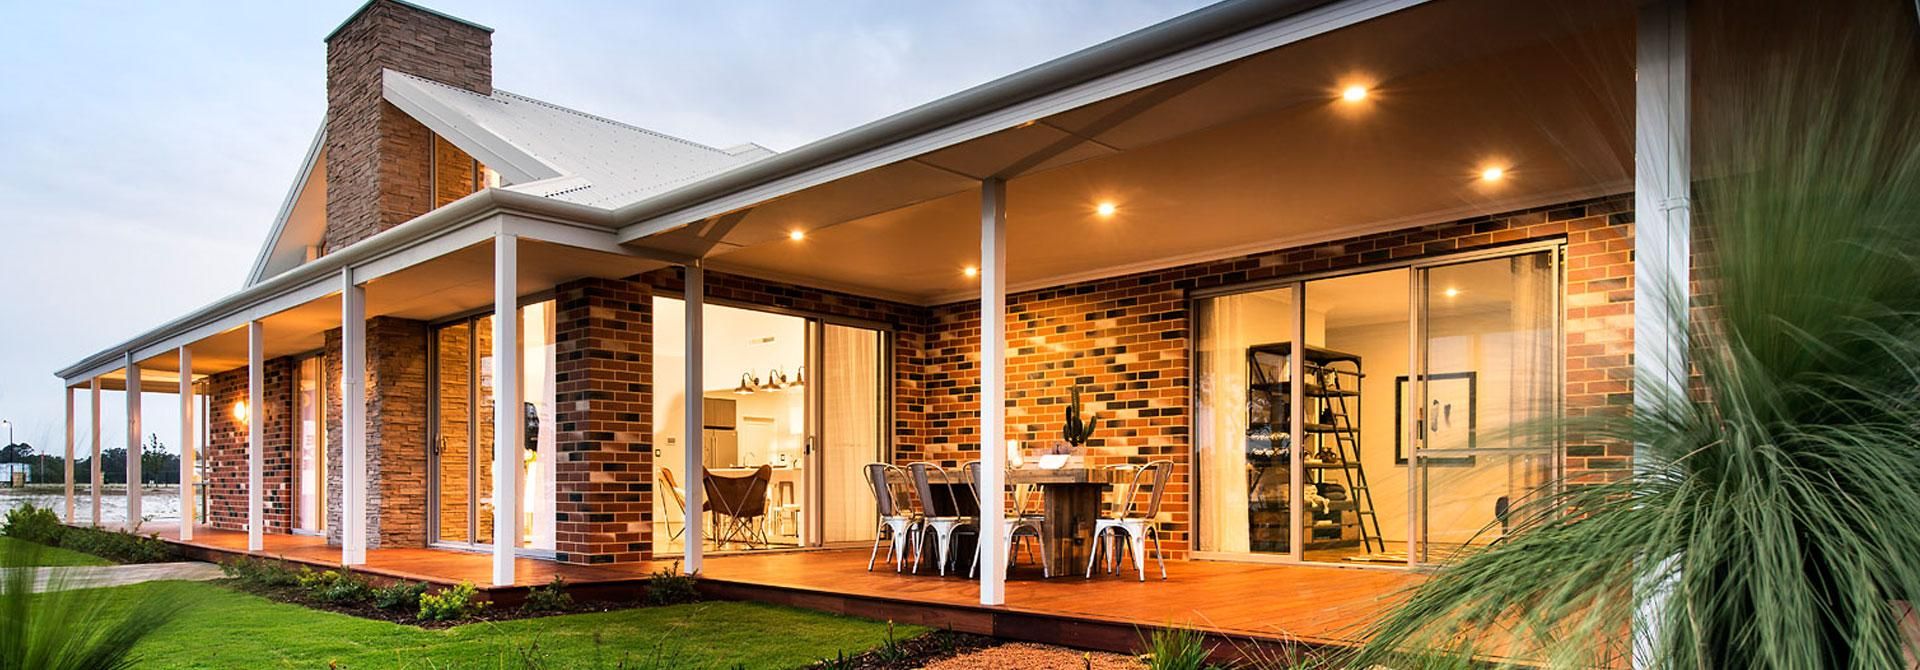 new house designs perth Home Design Get New House Designs Perth Images